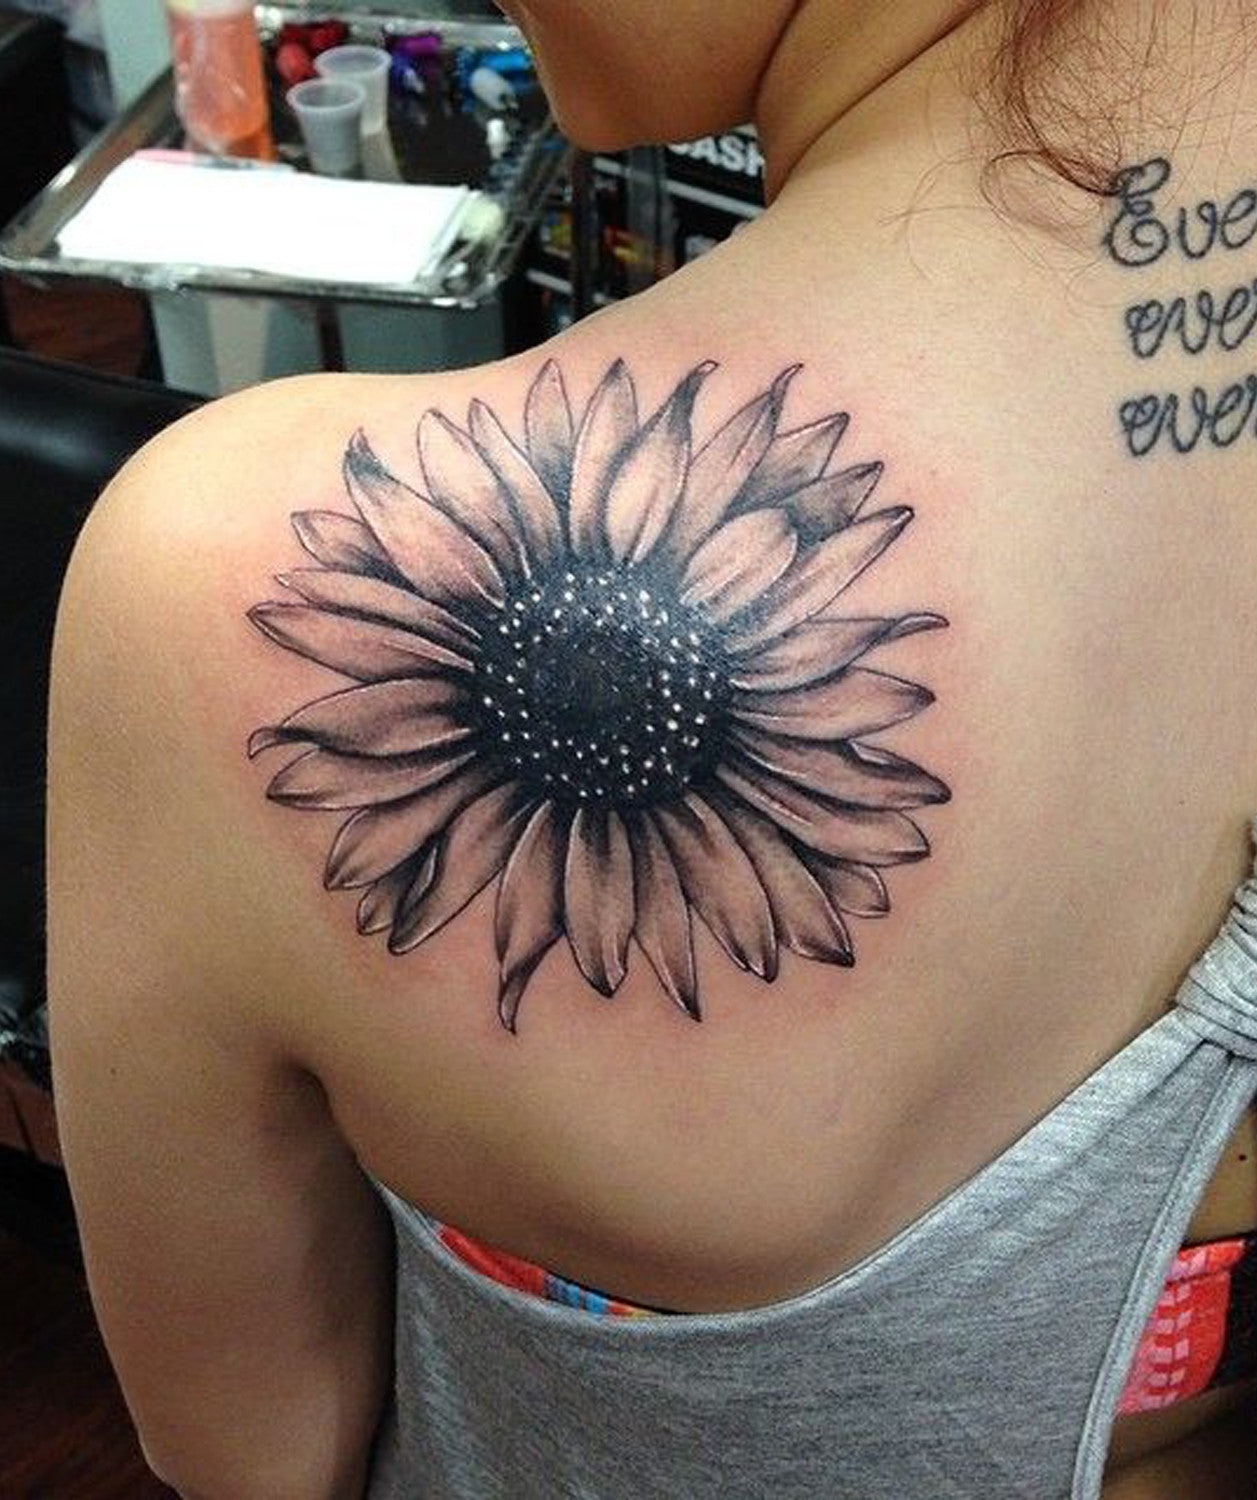 This sunflower tattoo design has a bee hovering nearby. Both are symbols of  life and fertility | Ratta Tattoo